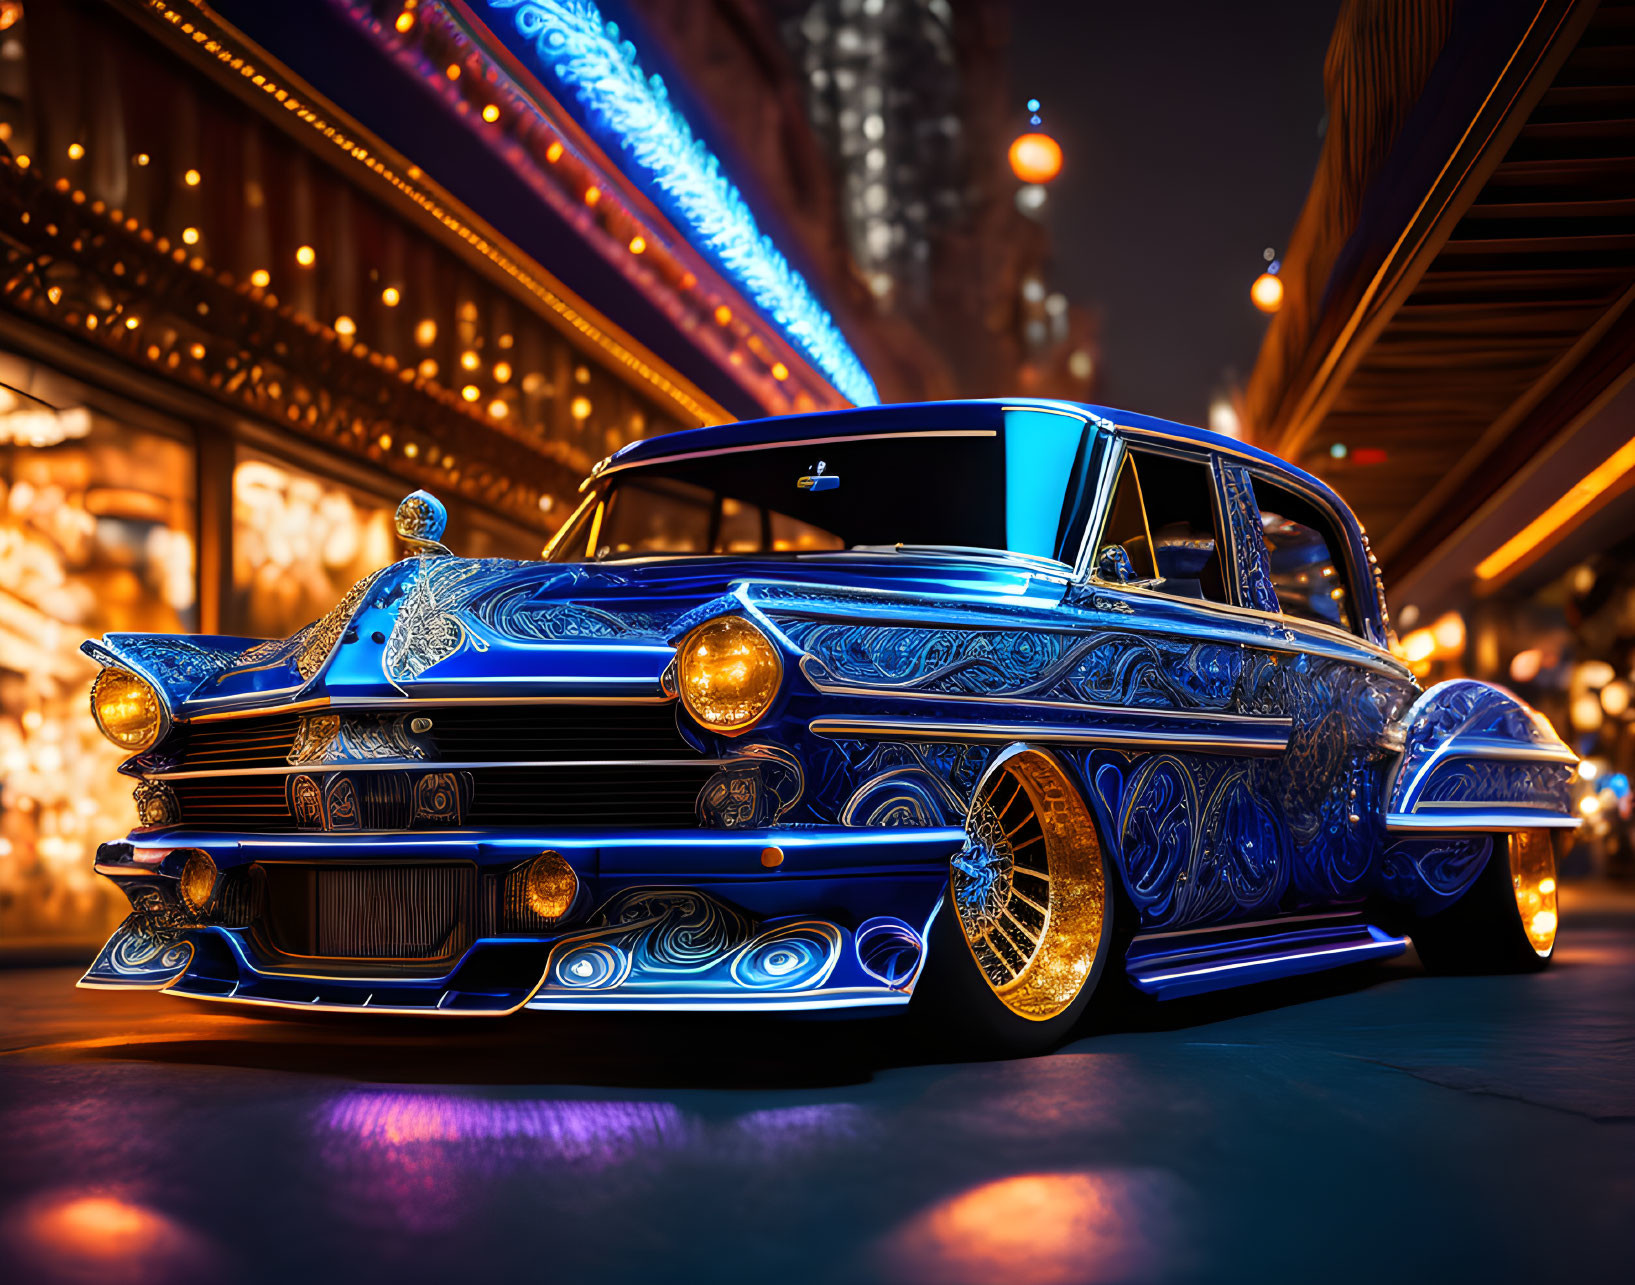 Vintage Car with Blue Designs and Golden Wheels Parked Under Neon Lights